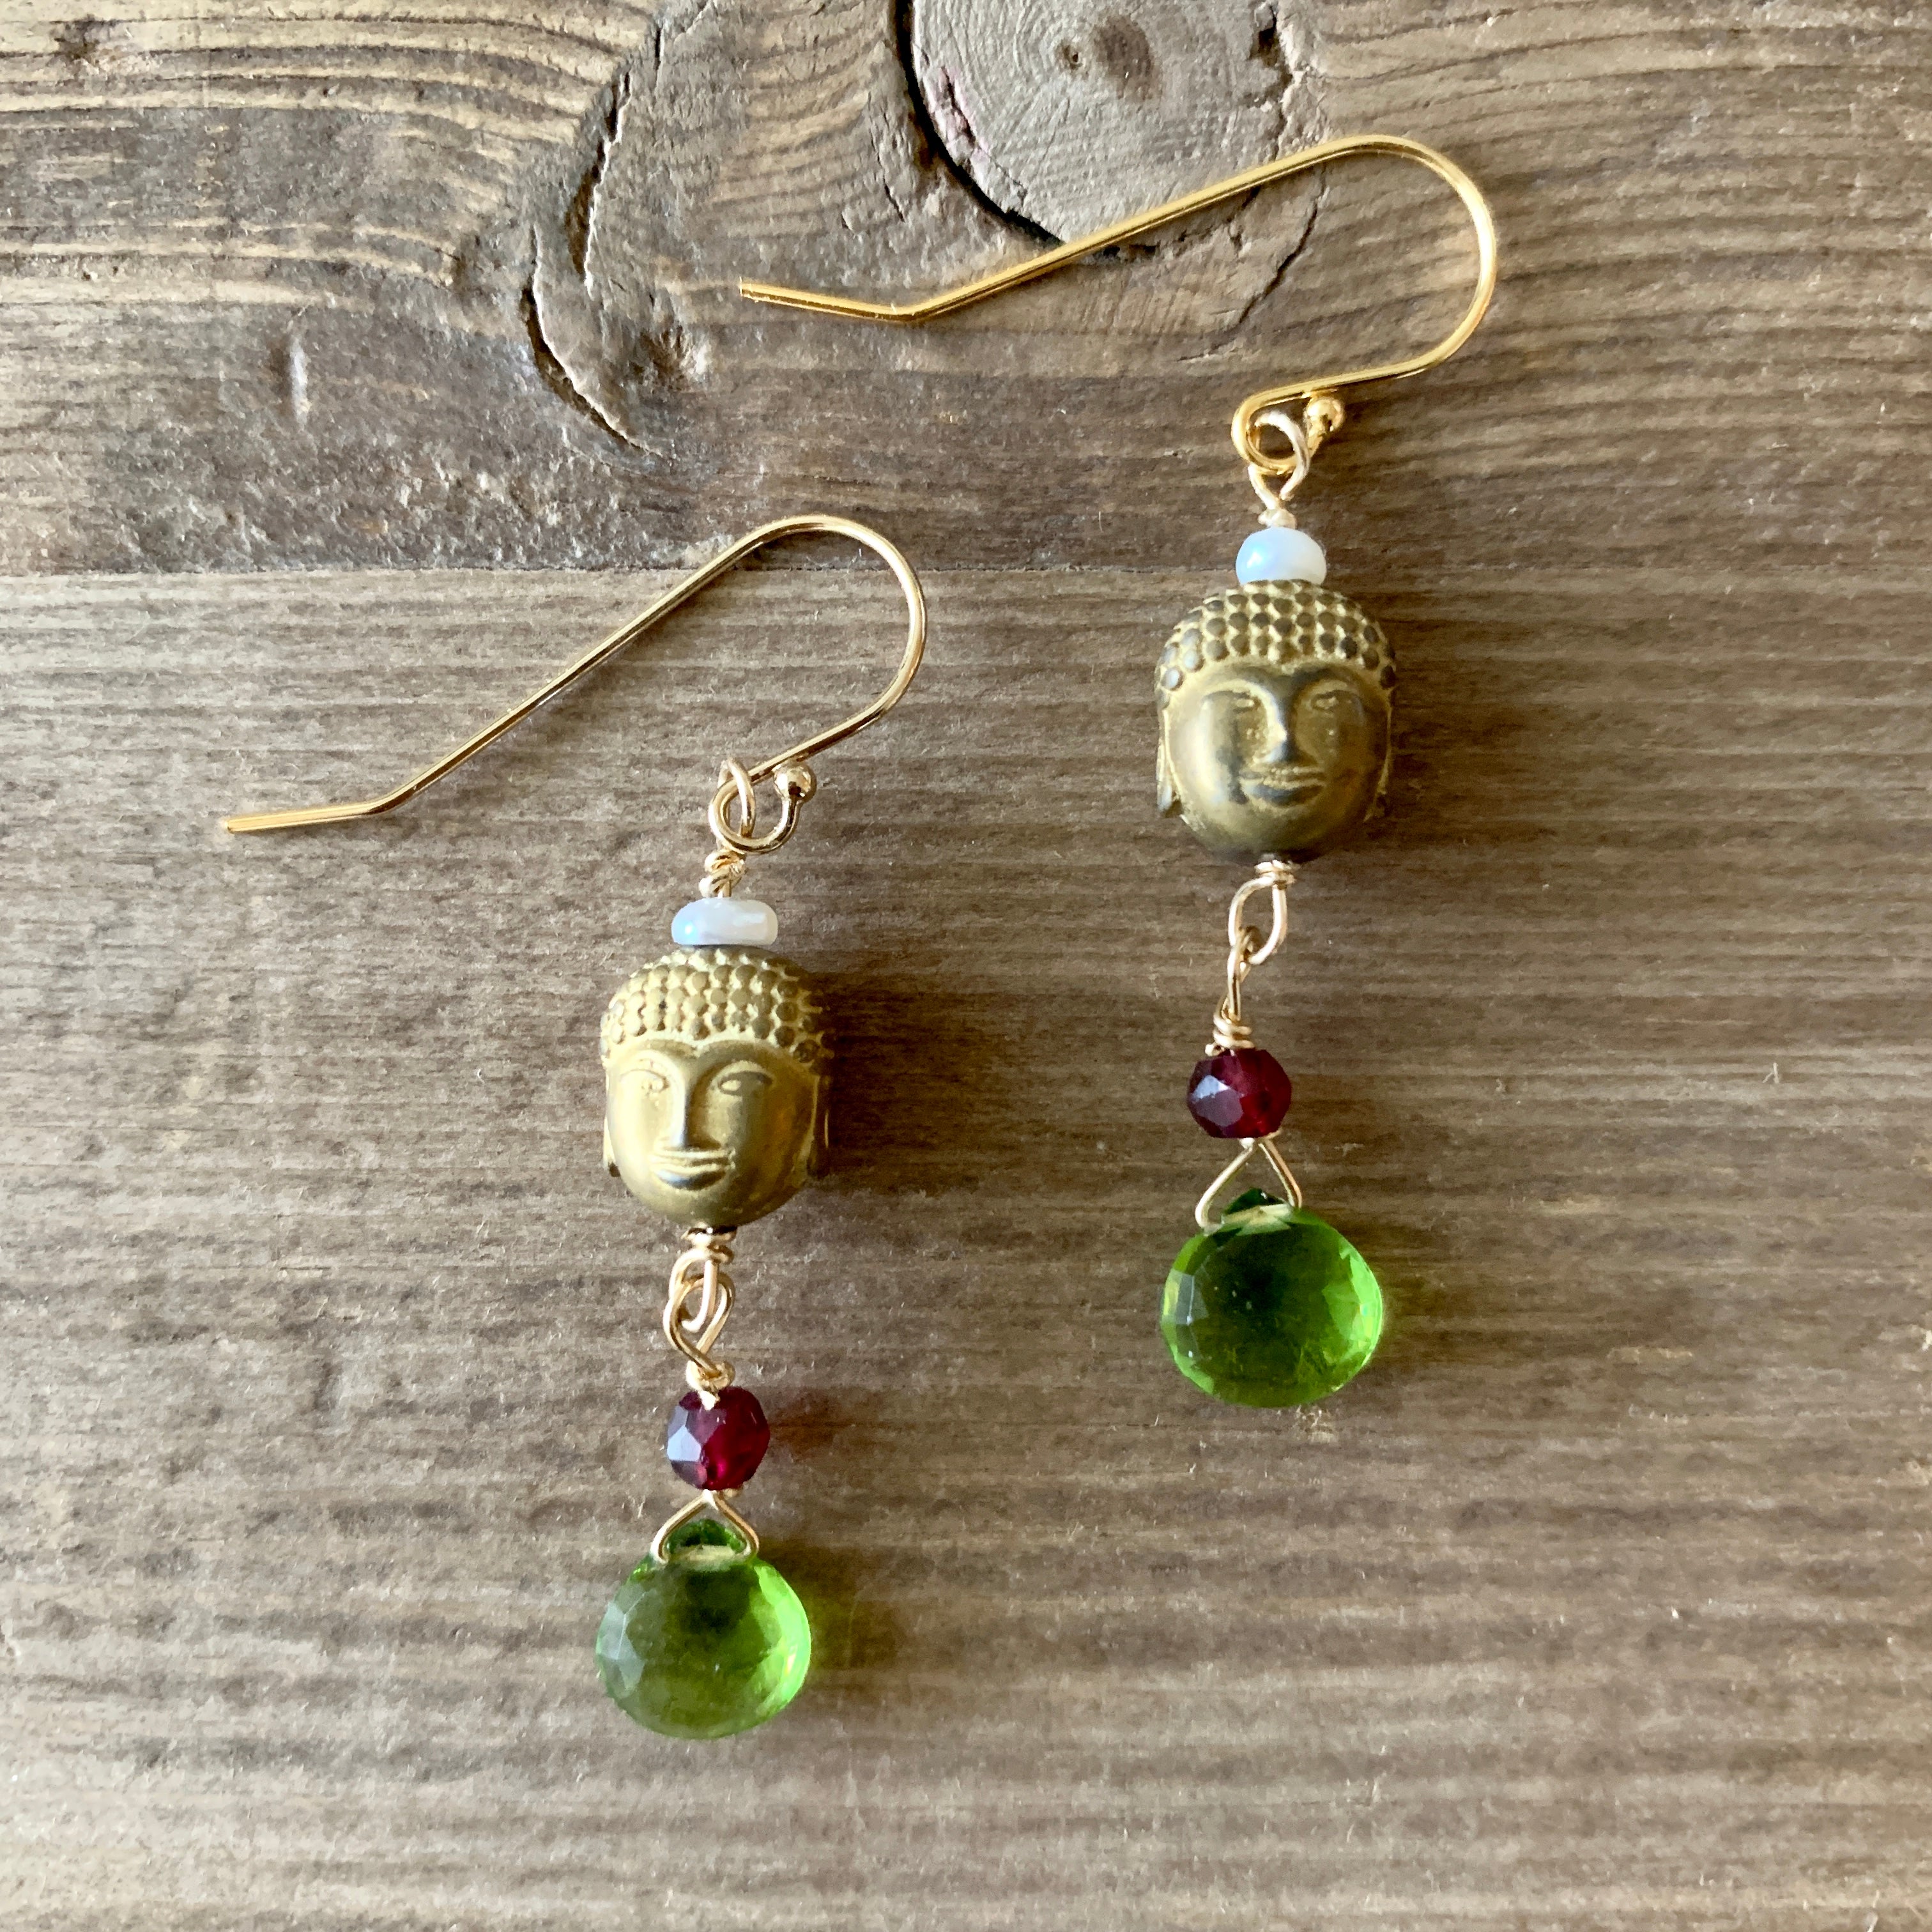 Carved Hematite and Peridot Briolette Earrings with Garnet and Freshwater Pearl